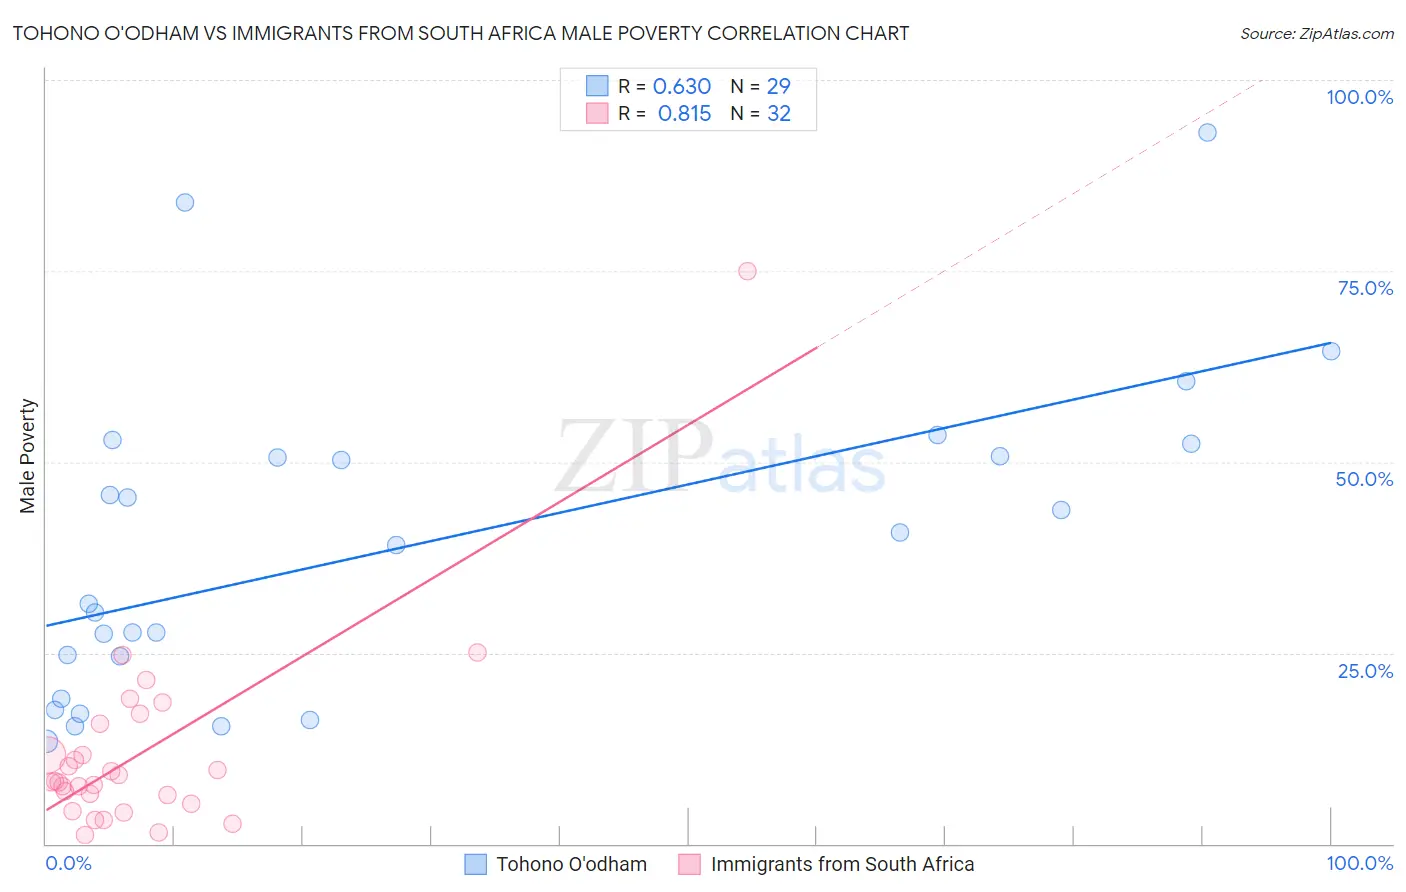 Tohono O'odham vs Immigrants from South Africa Male Poverty